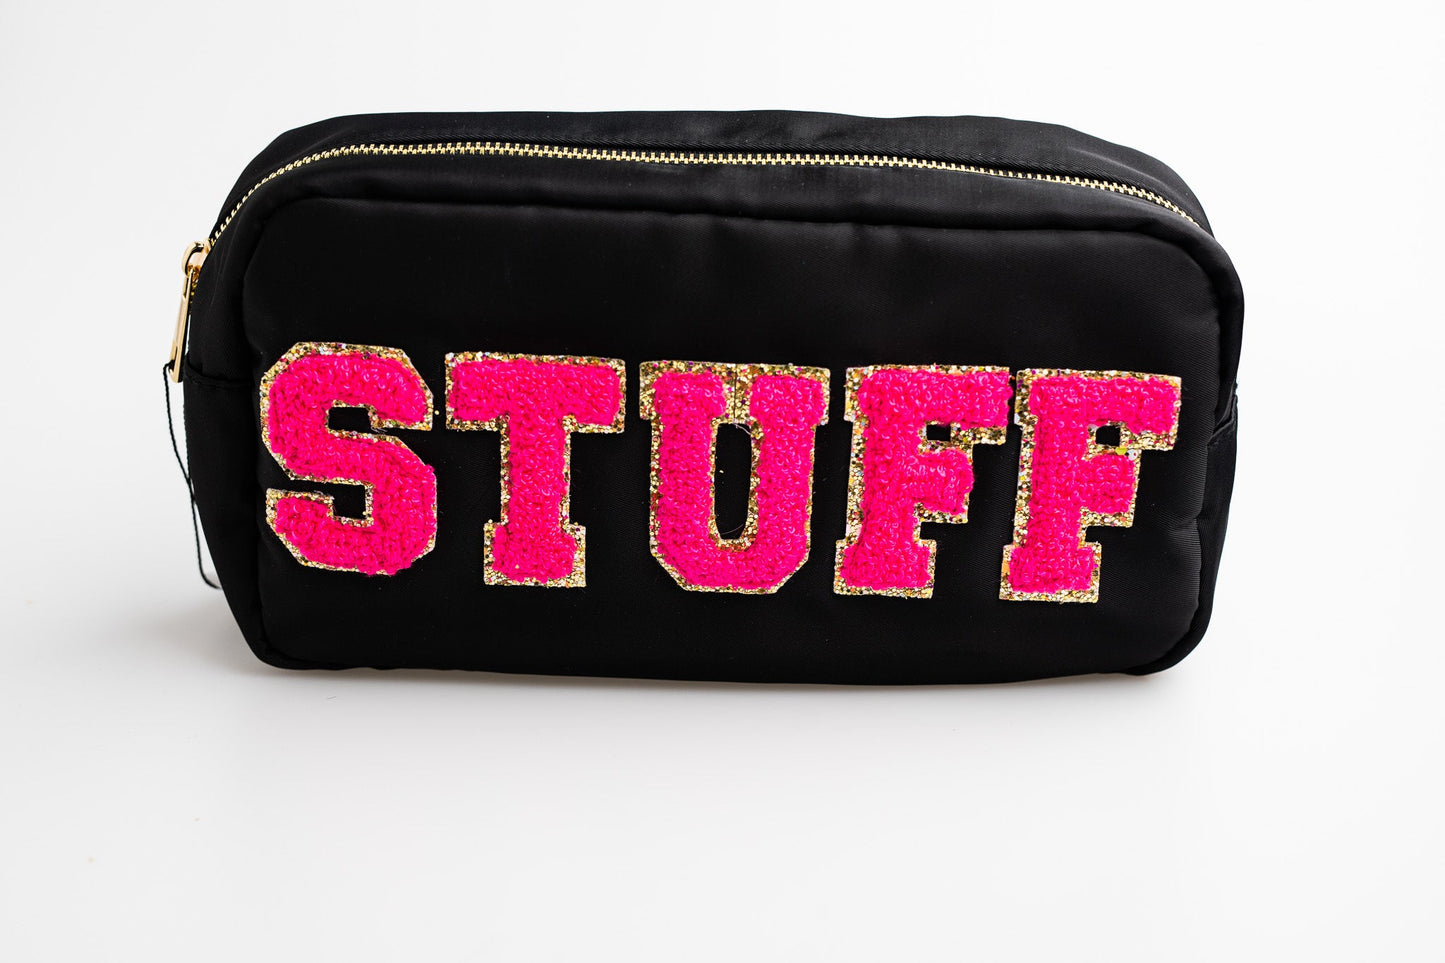 Black Large Nylon Pouch with S-T-U-F-F patches